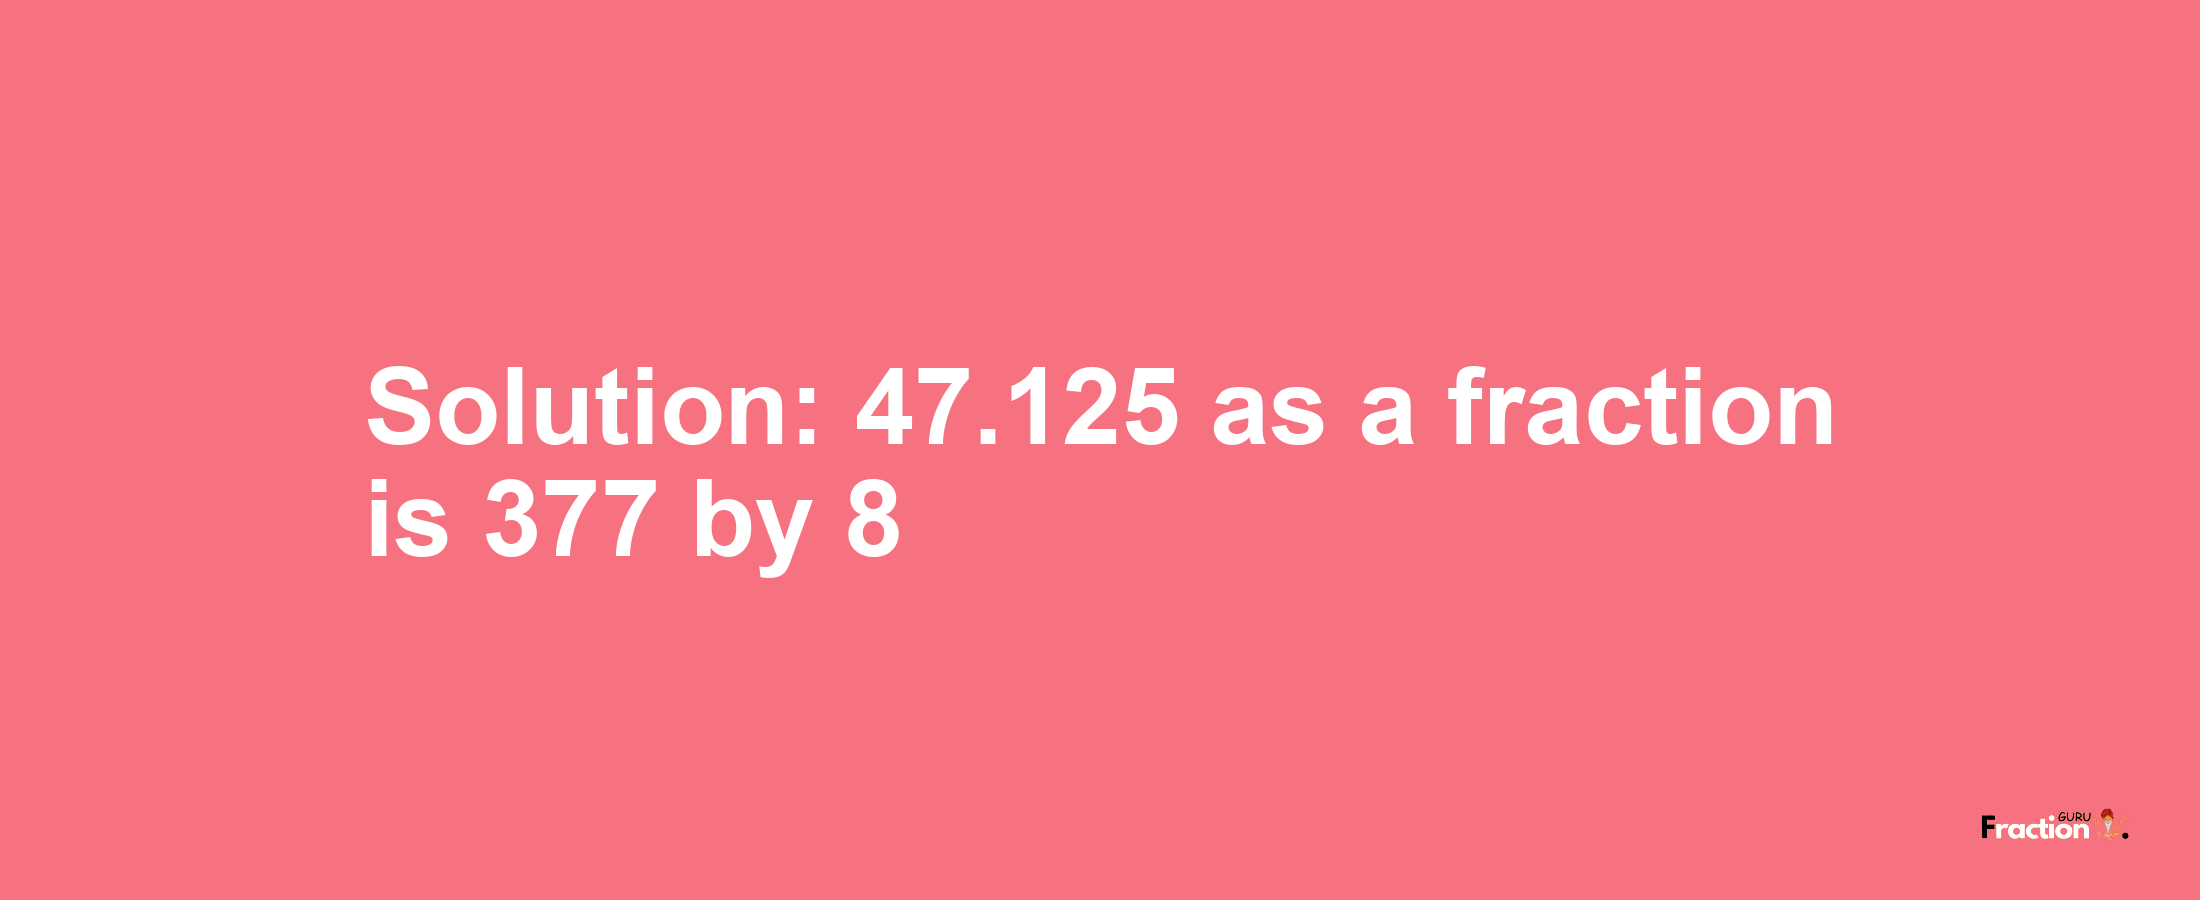 Solution:47.125 as a fraction is 377/8